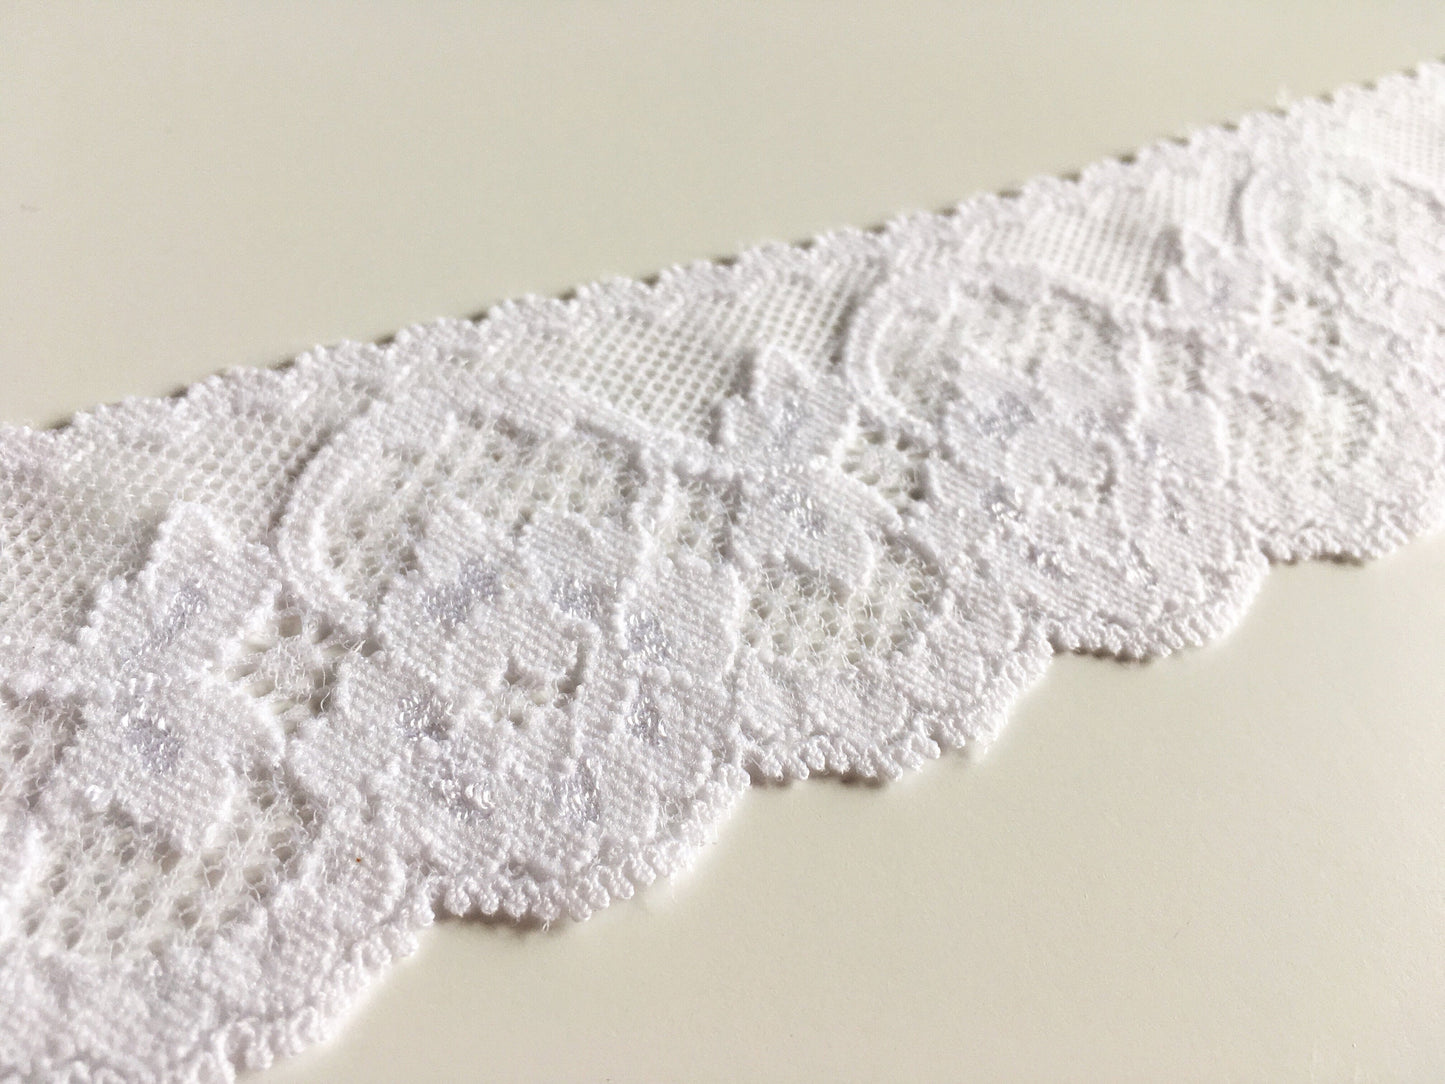 Stretch Lace Trim | 5cm Wide | Ivory/Cream | Floral Lingerie Sewing Supplies | Price per metre